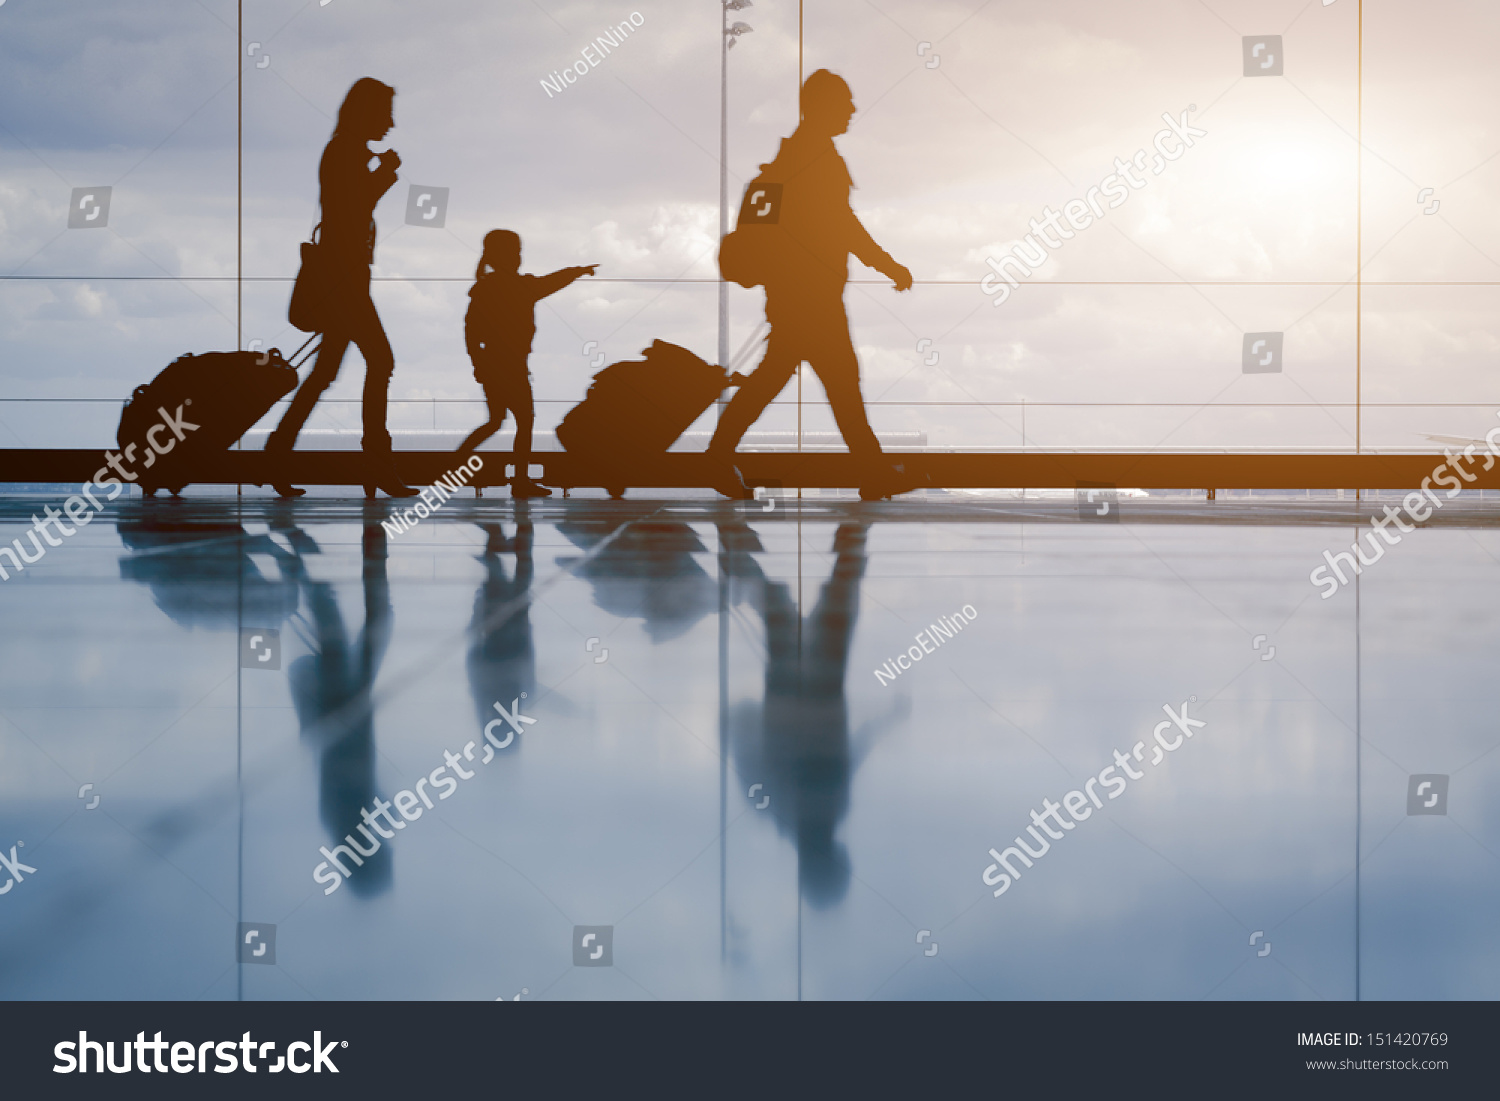 Silhouette of young family with luggage walking at airport, girl showing something through the window #151420769